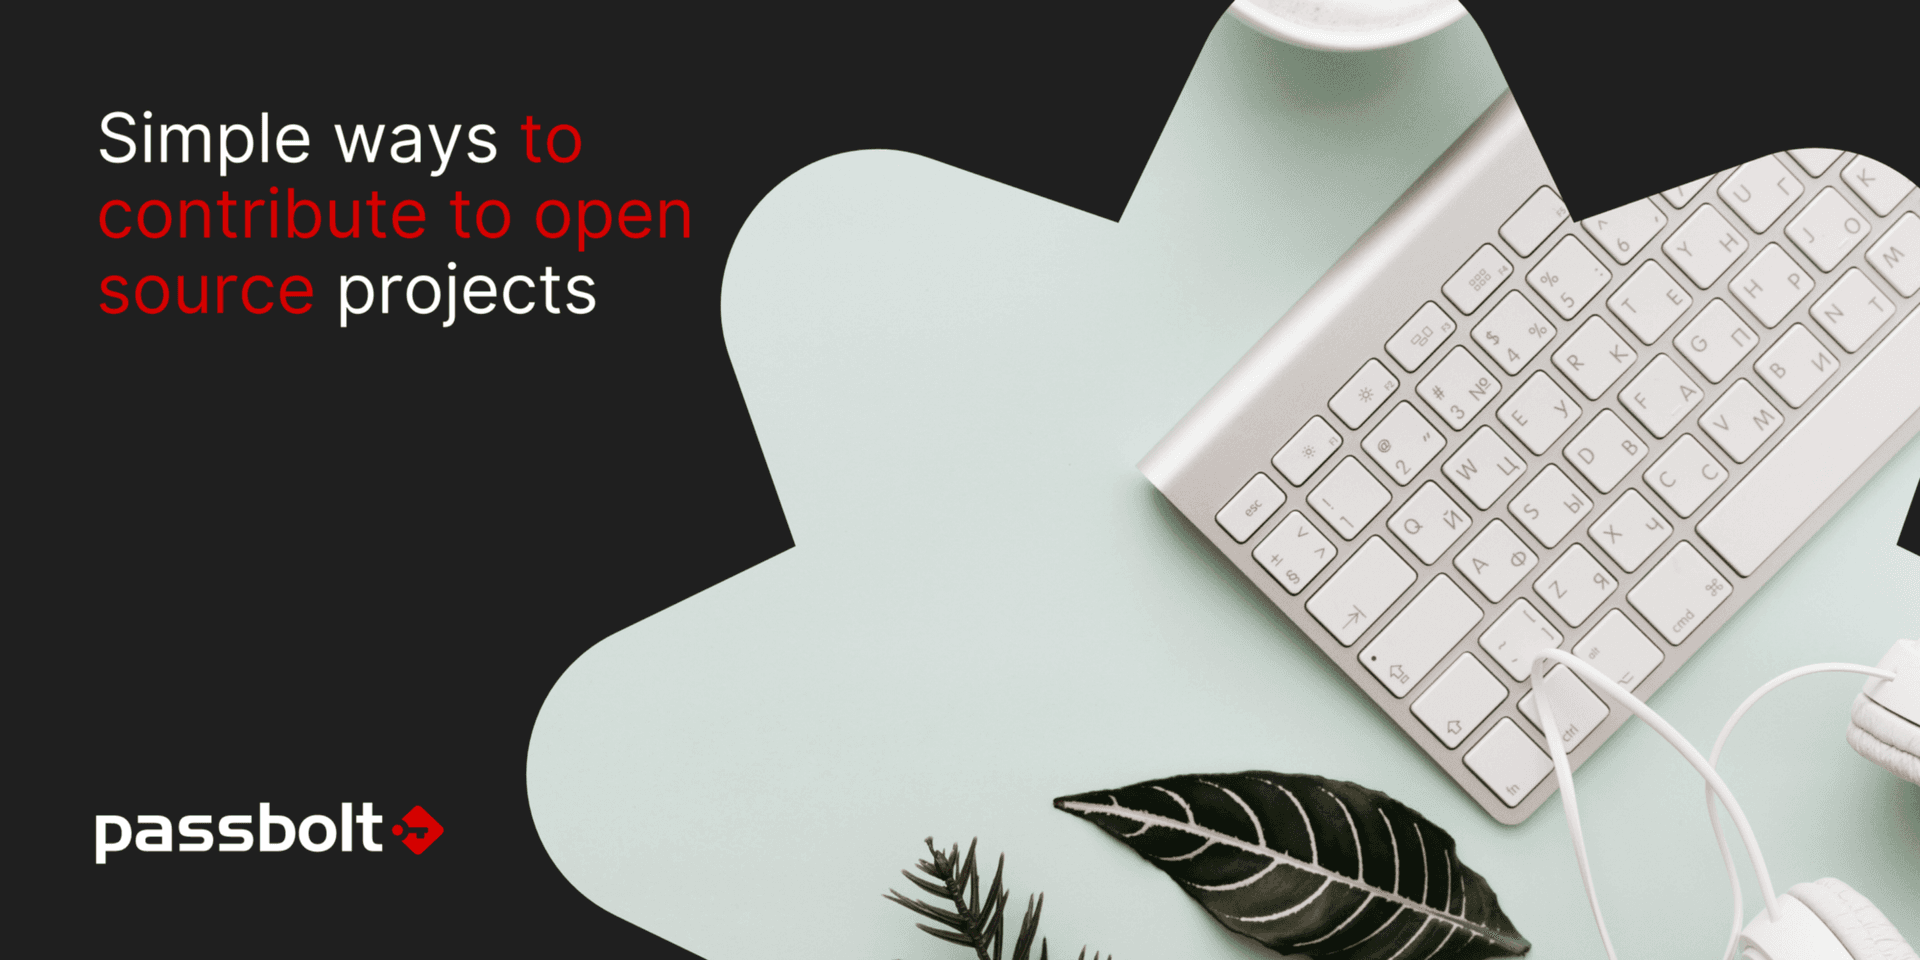 Simple ways to contribute to open source projects